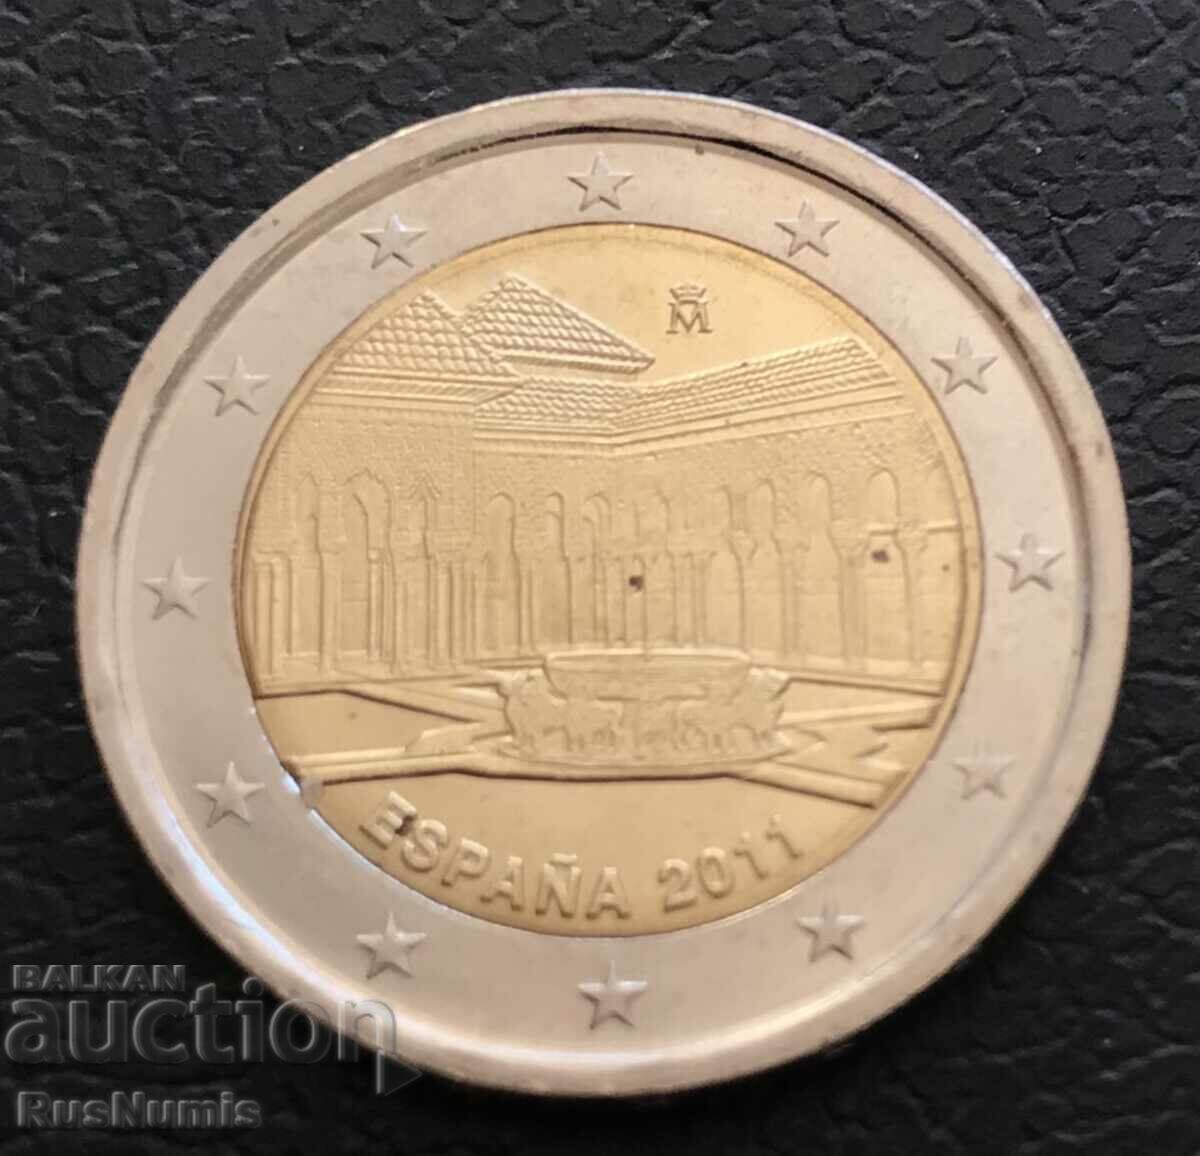 Spain.2 Euro 2011 Alhambra Fortress.UNC.